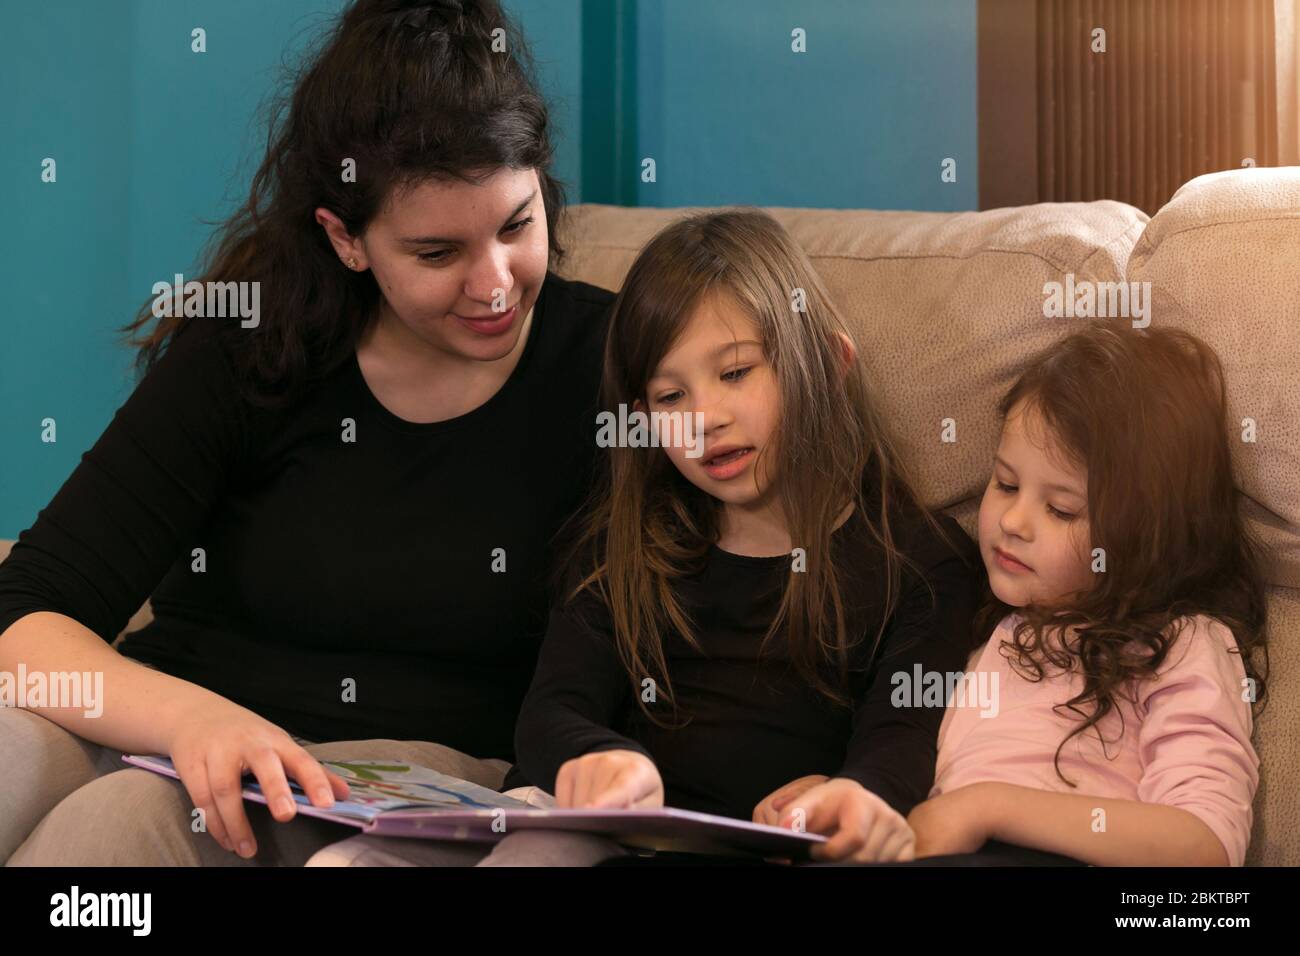 Two young children reading stories with their mother on the couch Stock Photo